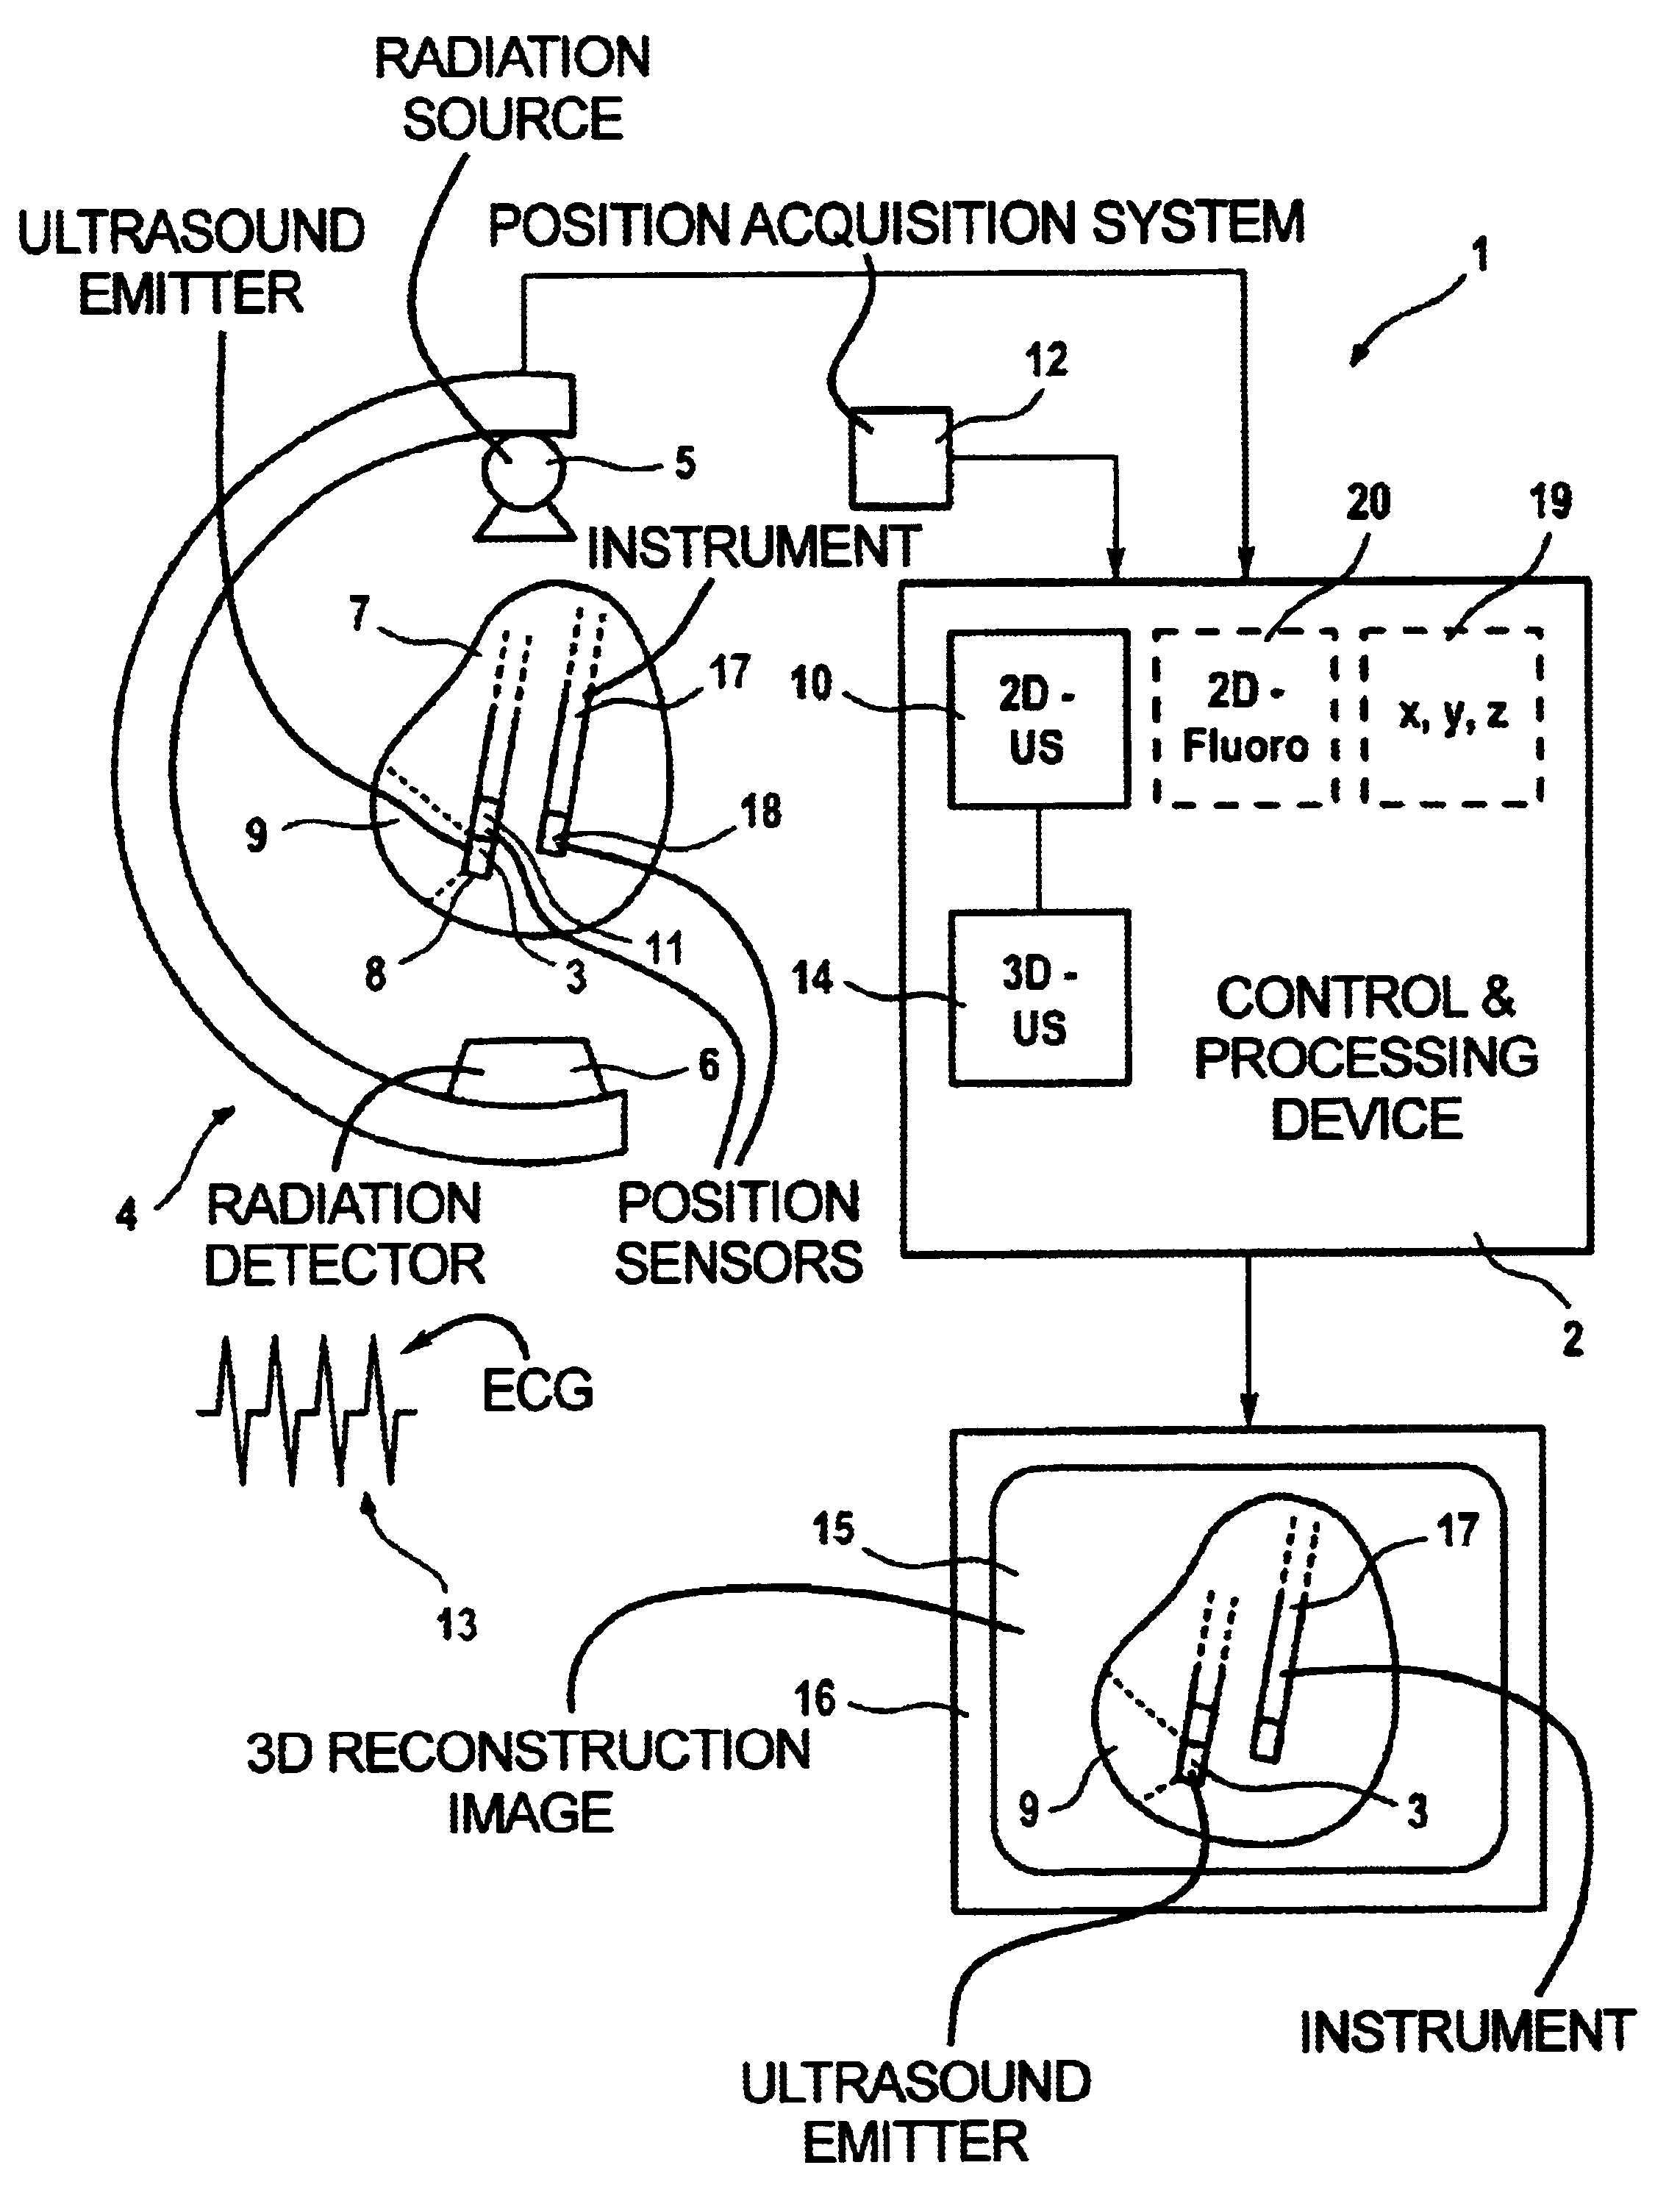 Method and apparatus for acquiring and displaying a medical instrument introduced into a cavity organ of a patient to be examined or treated